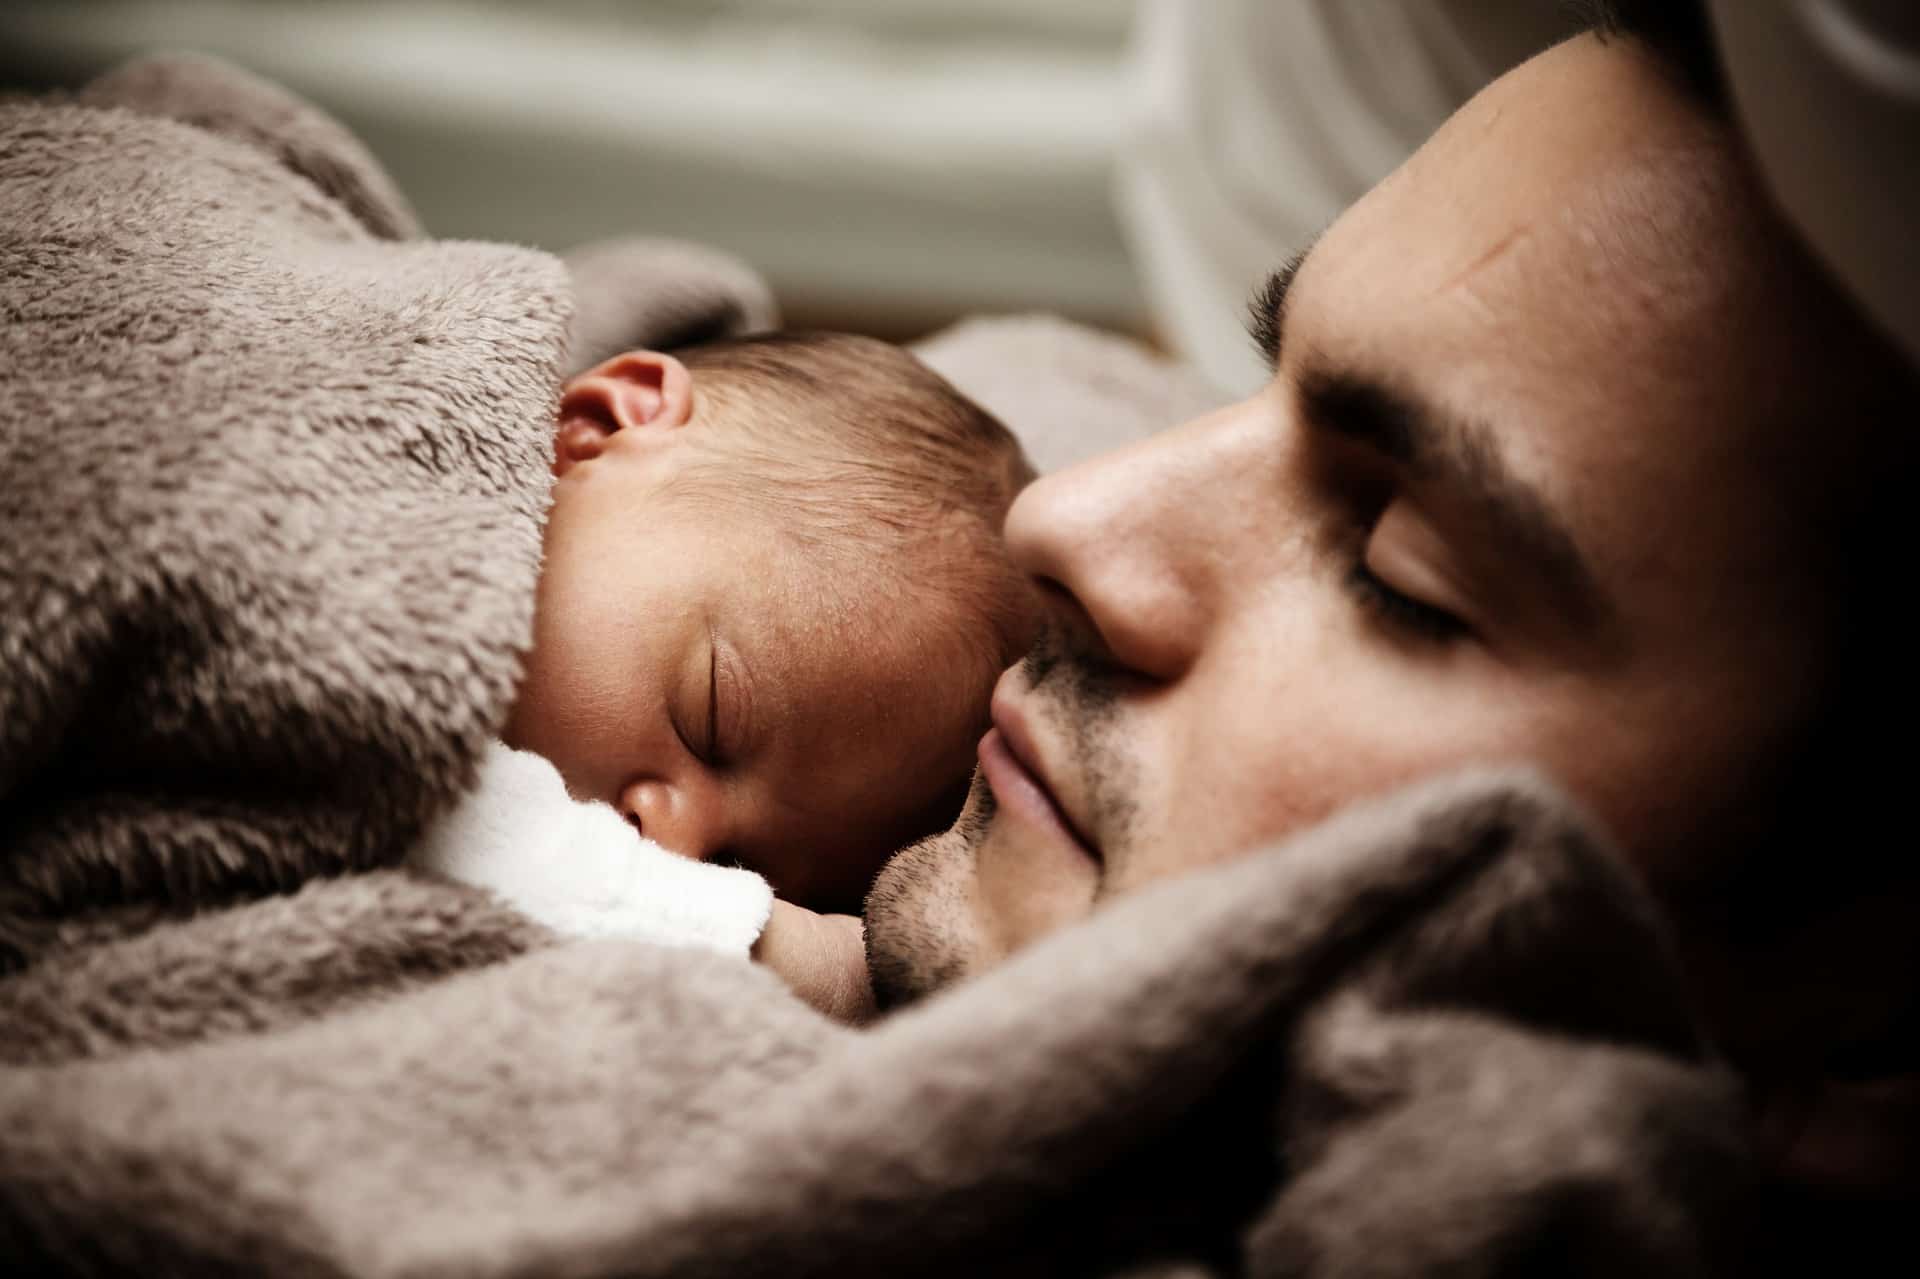 The importance of fathers in a child’s life